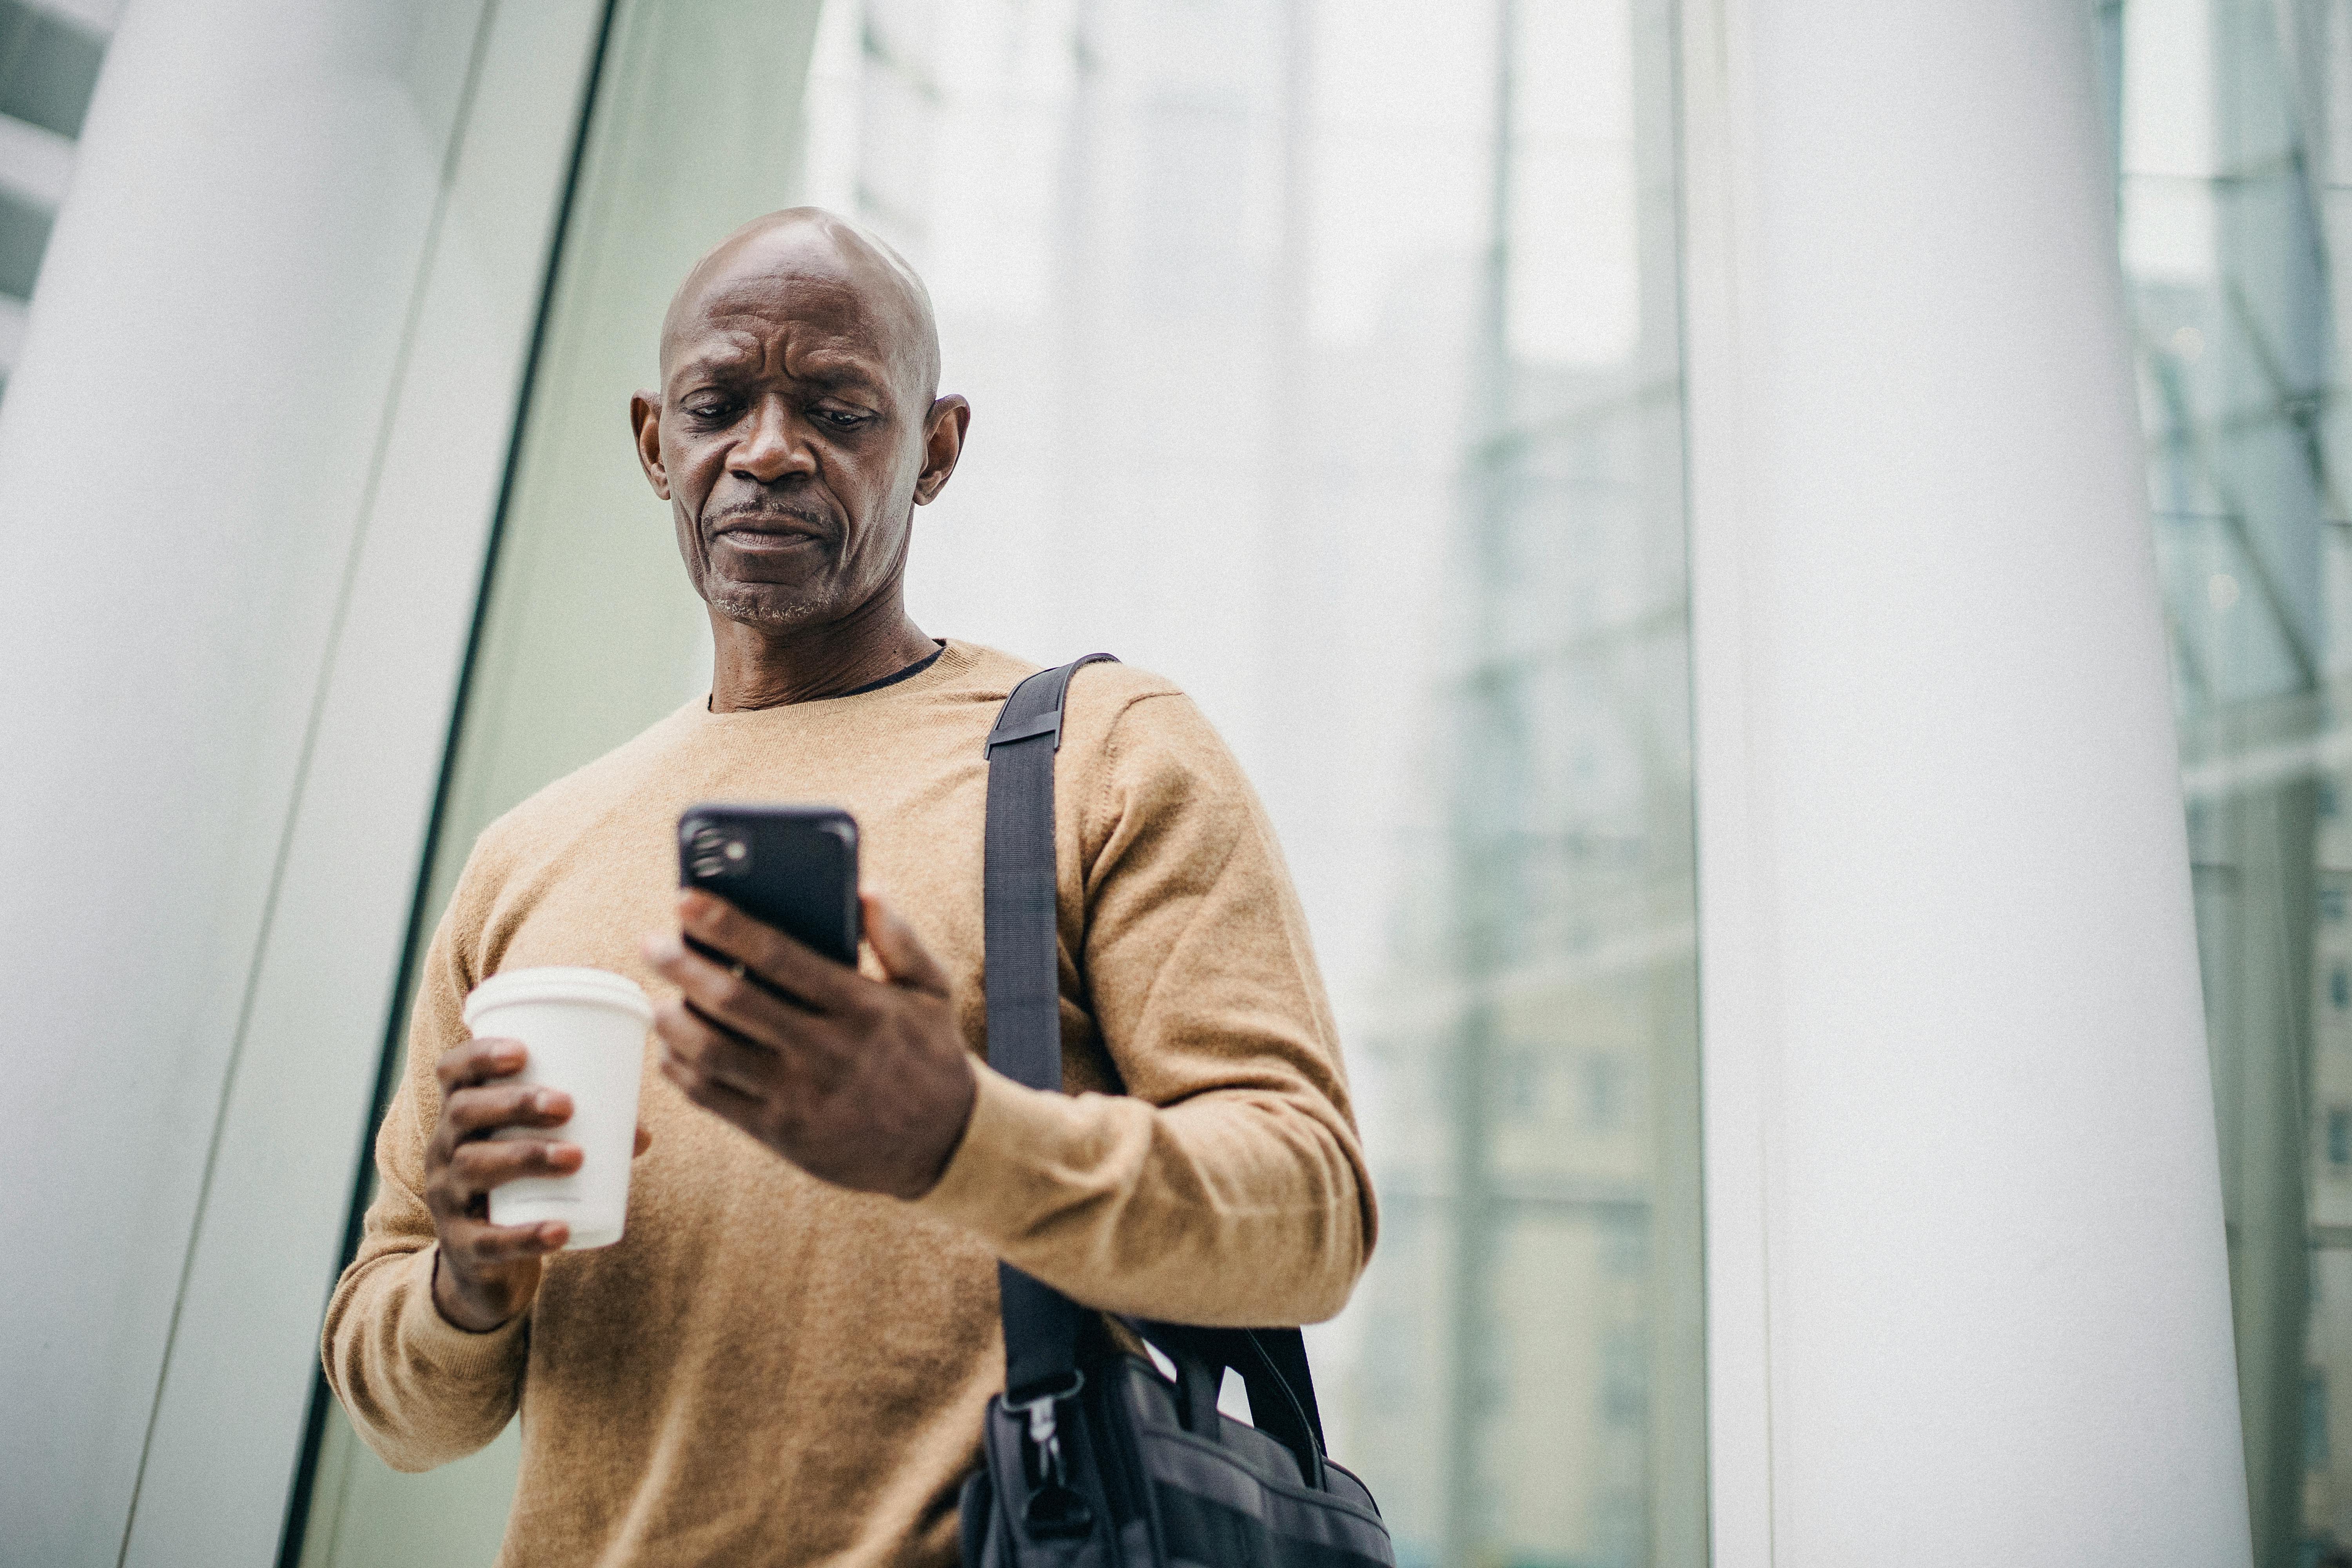 An older man looking sad while looking at his phone while holding a beverage | Source: Pexels